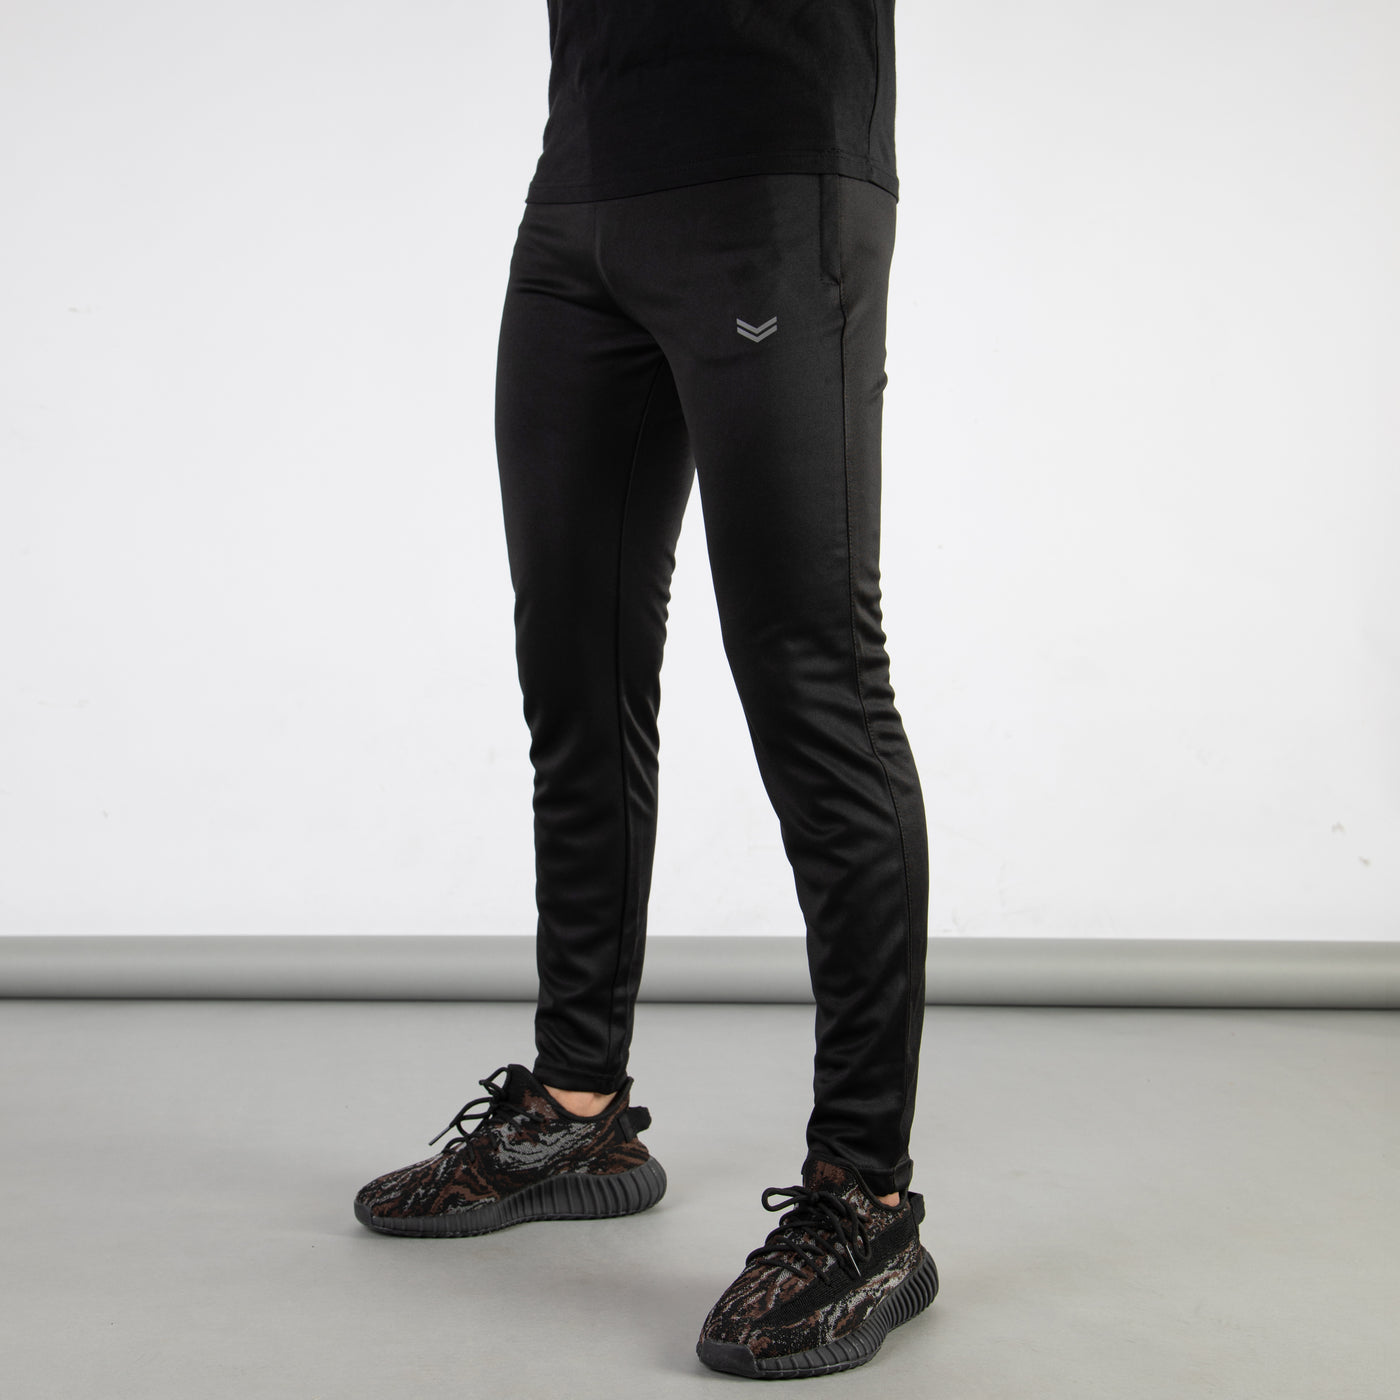 Solid Black Quick Dry Bottoms